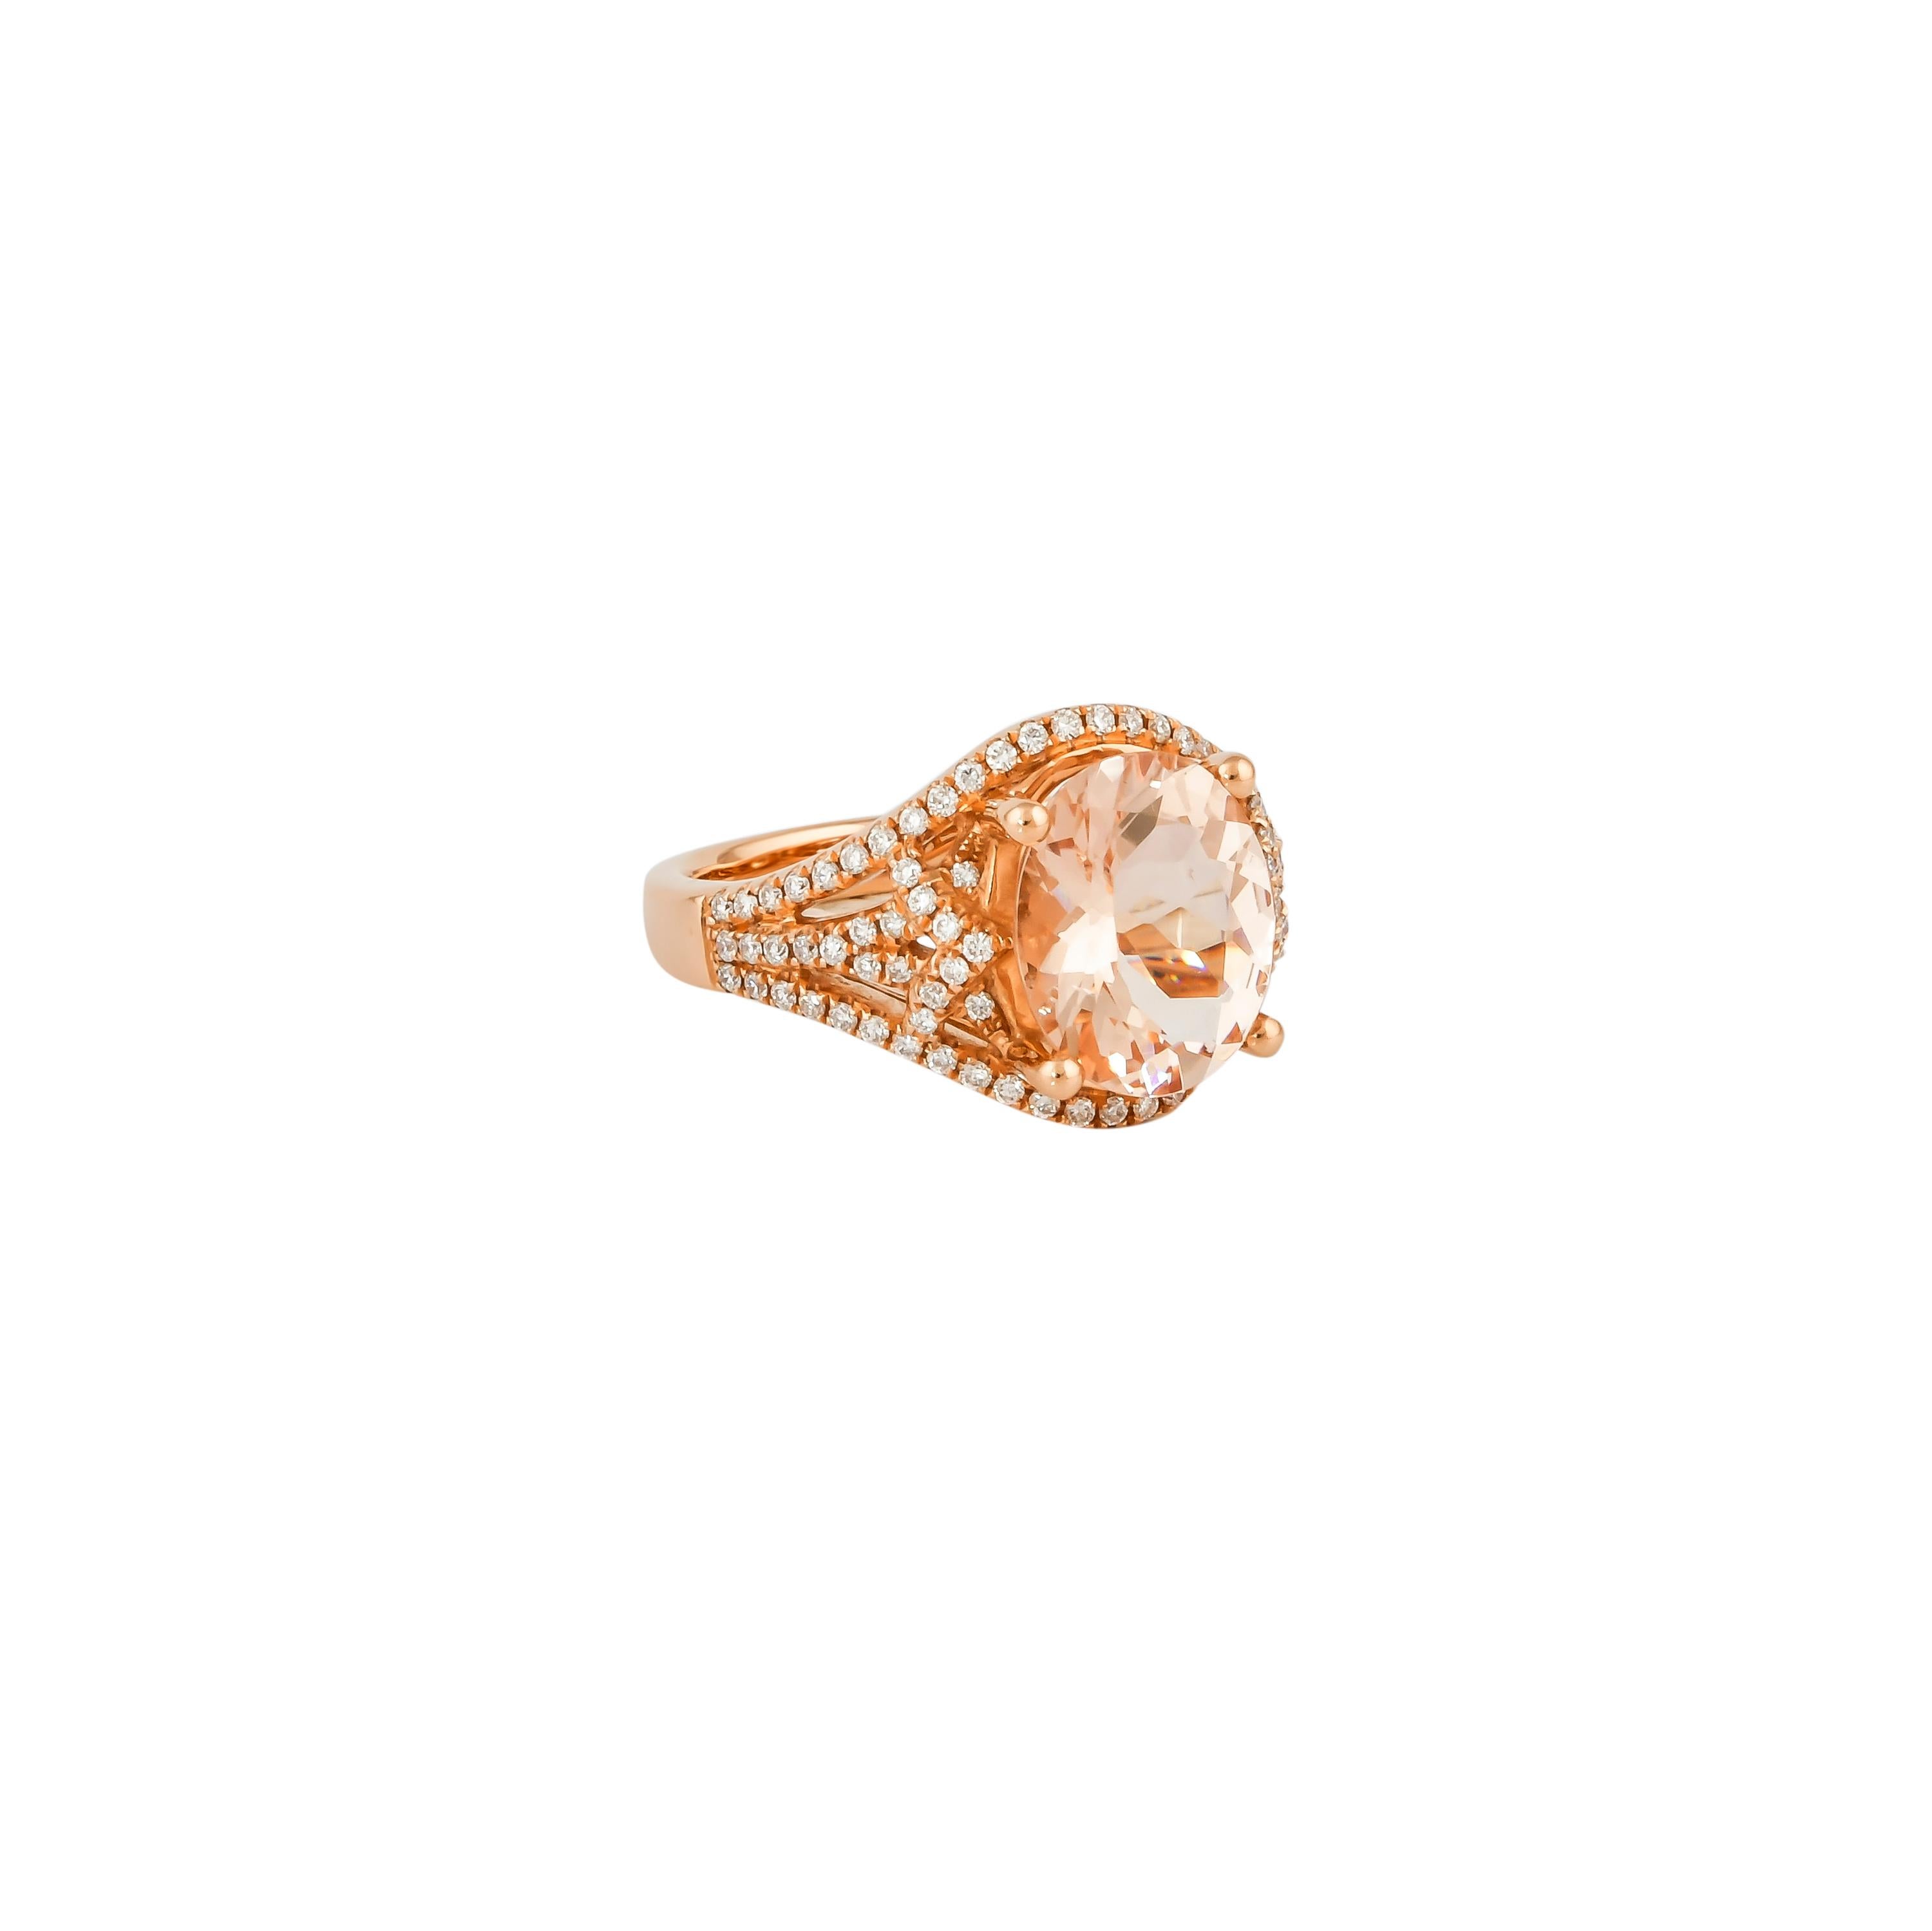 Contemporary 3.6 Carat Morganite and Diamond Ring in 18 Karat Rose Gold For Sale